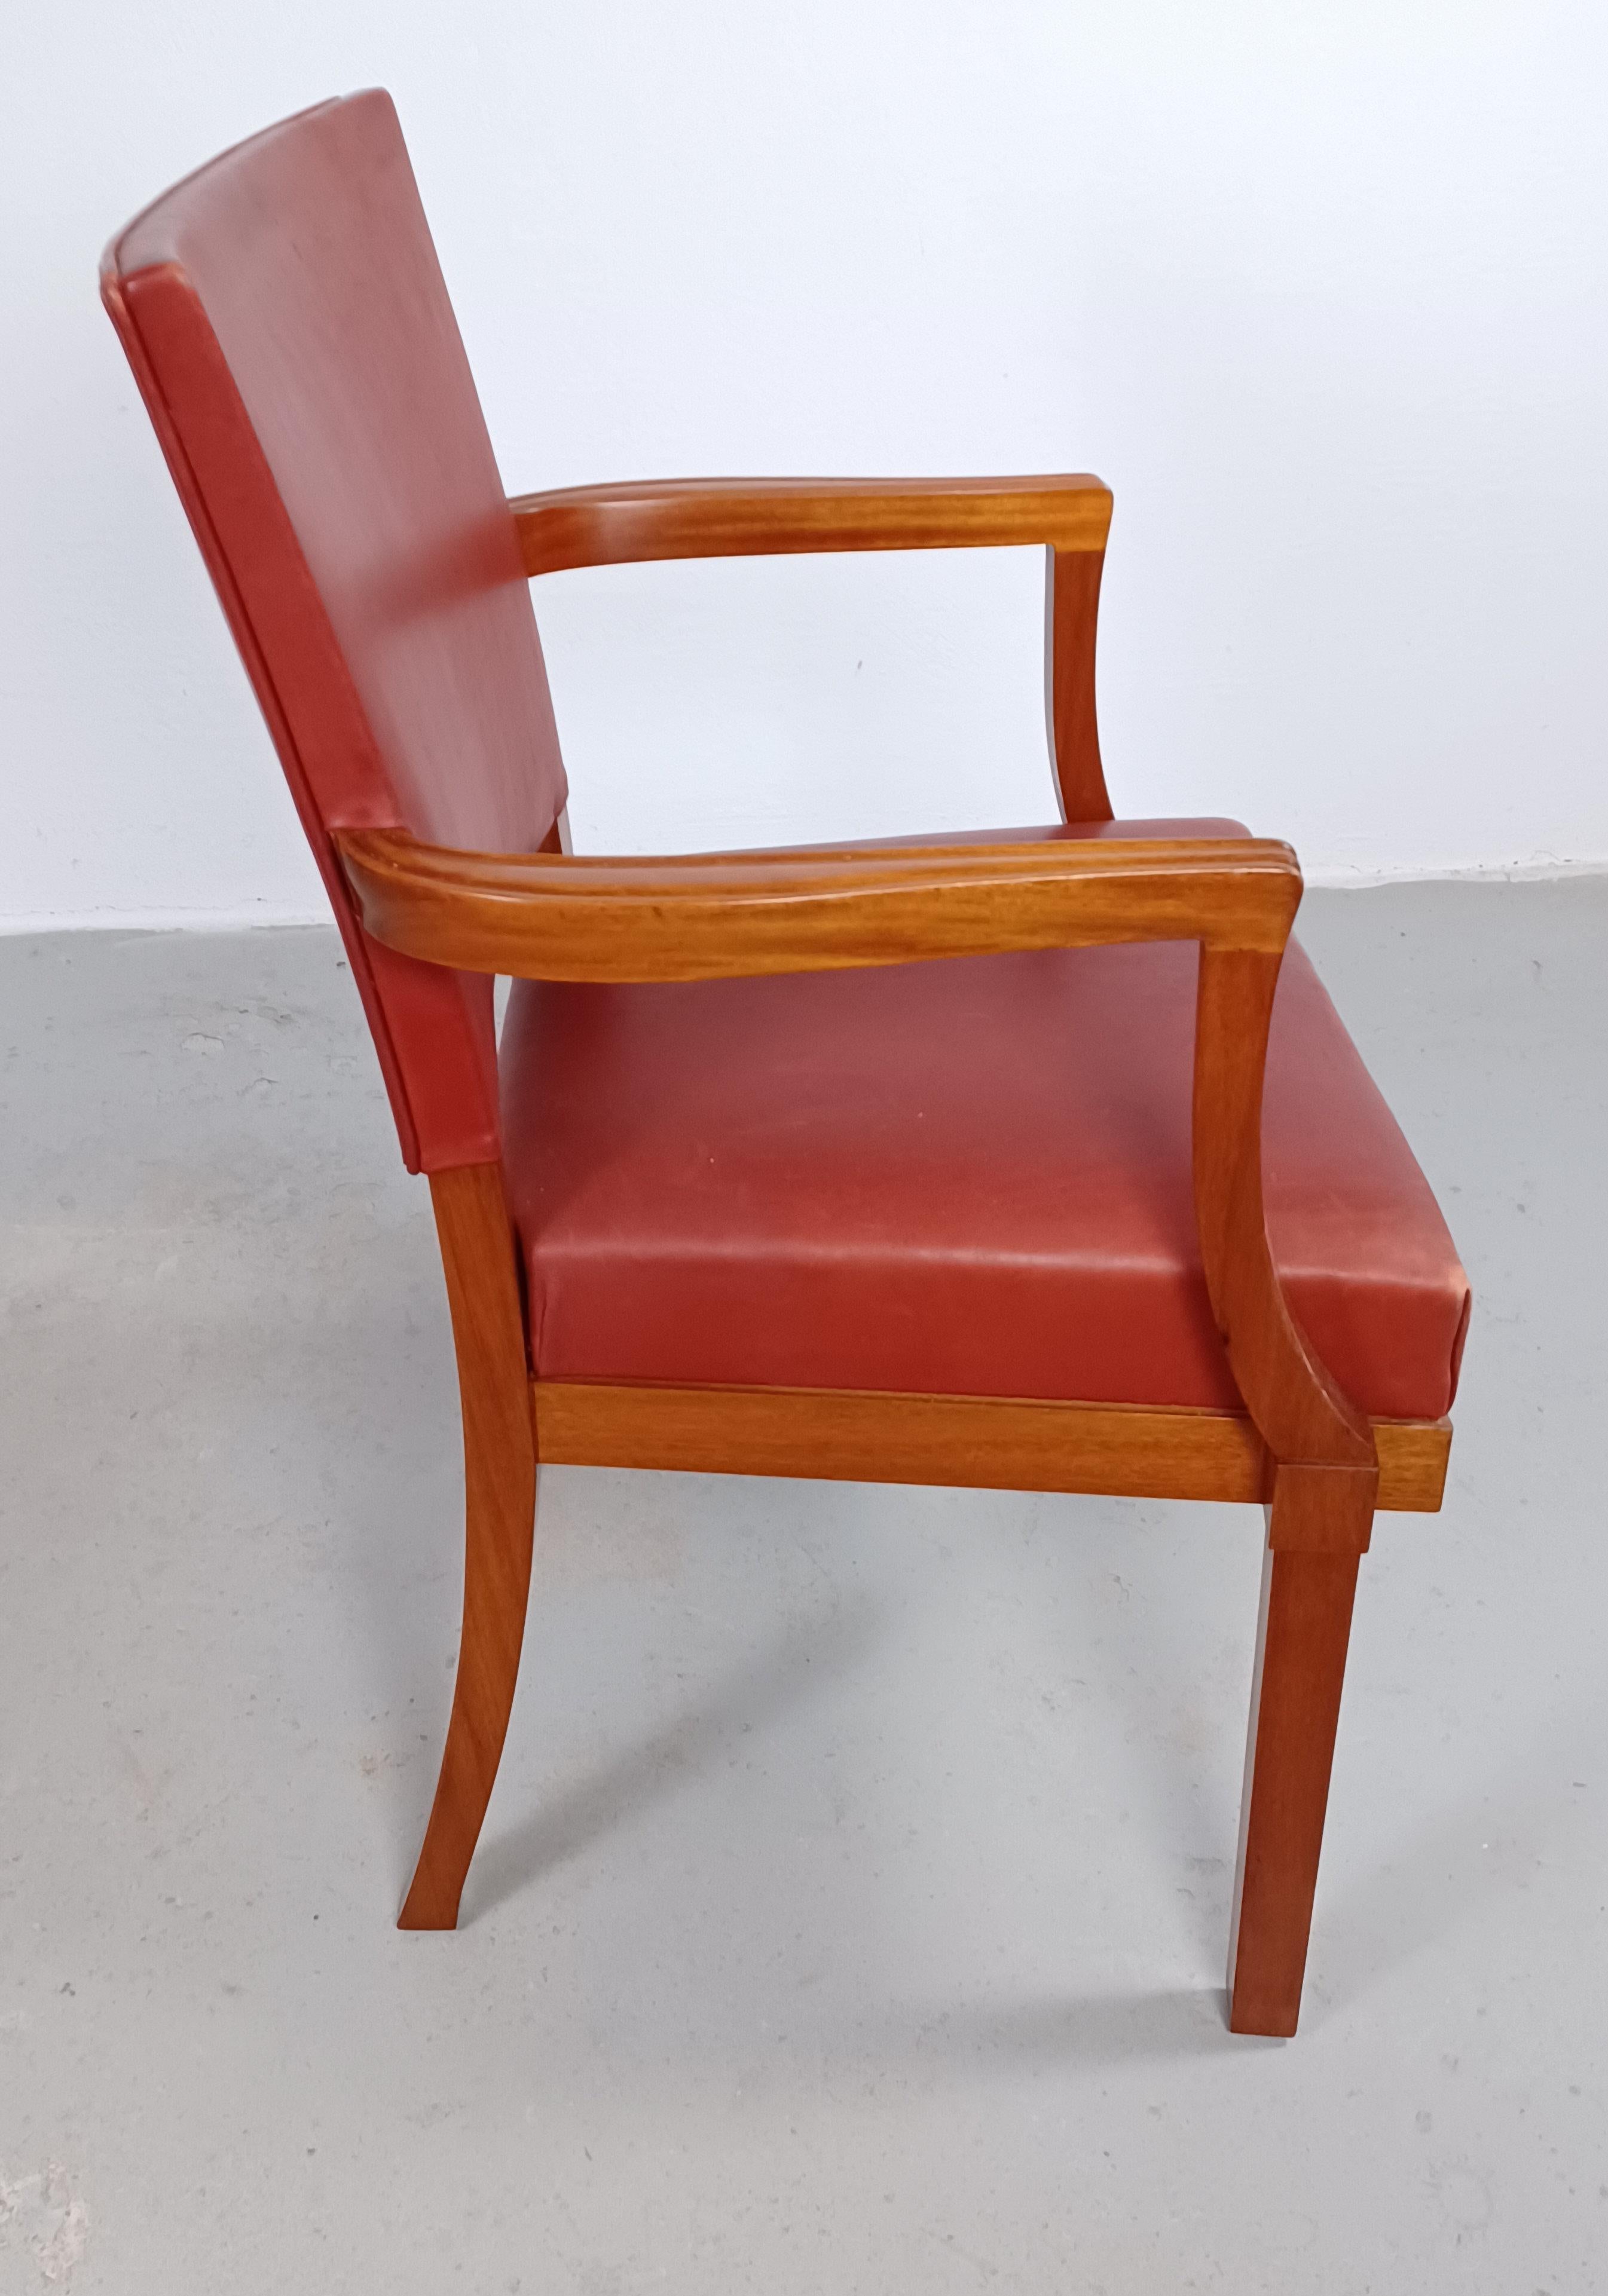 1935 Set of Two Restored Kaare Klint Barcelona or The Red Chair by Rud Rasmussen For Sale 2